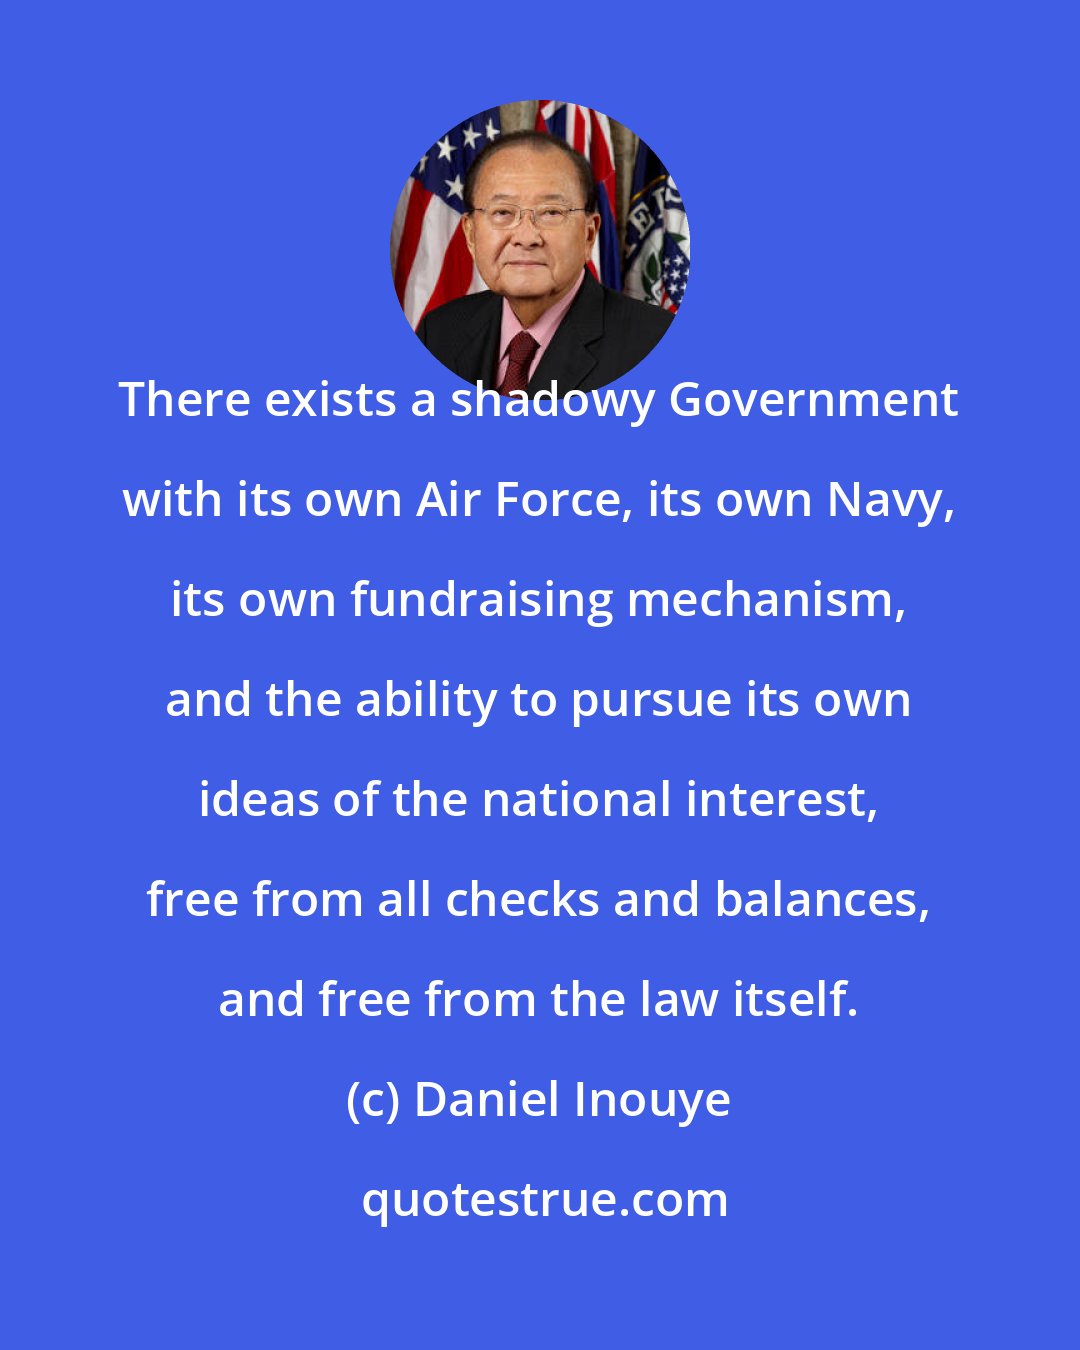 Daniel Inouye: There exists a shadowy Government with its own Air Force, its own Navy, its own fundraising mechanism, and the ability to pursue its own ideas of the national interest, free from all checks and balances, and free from the law itself.